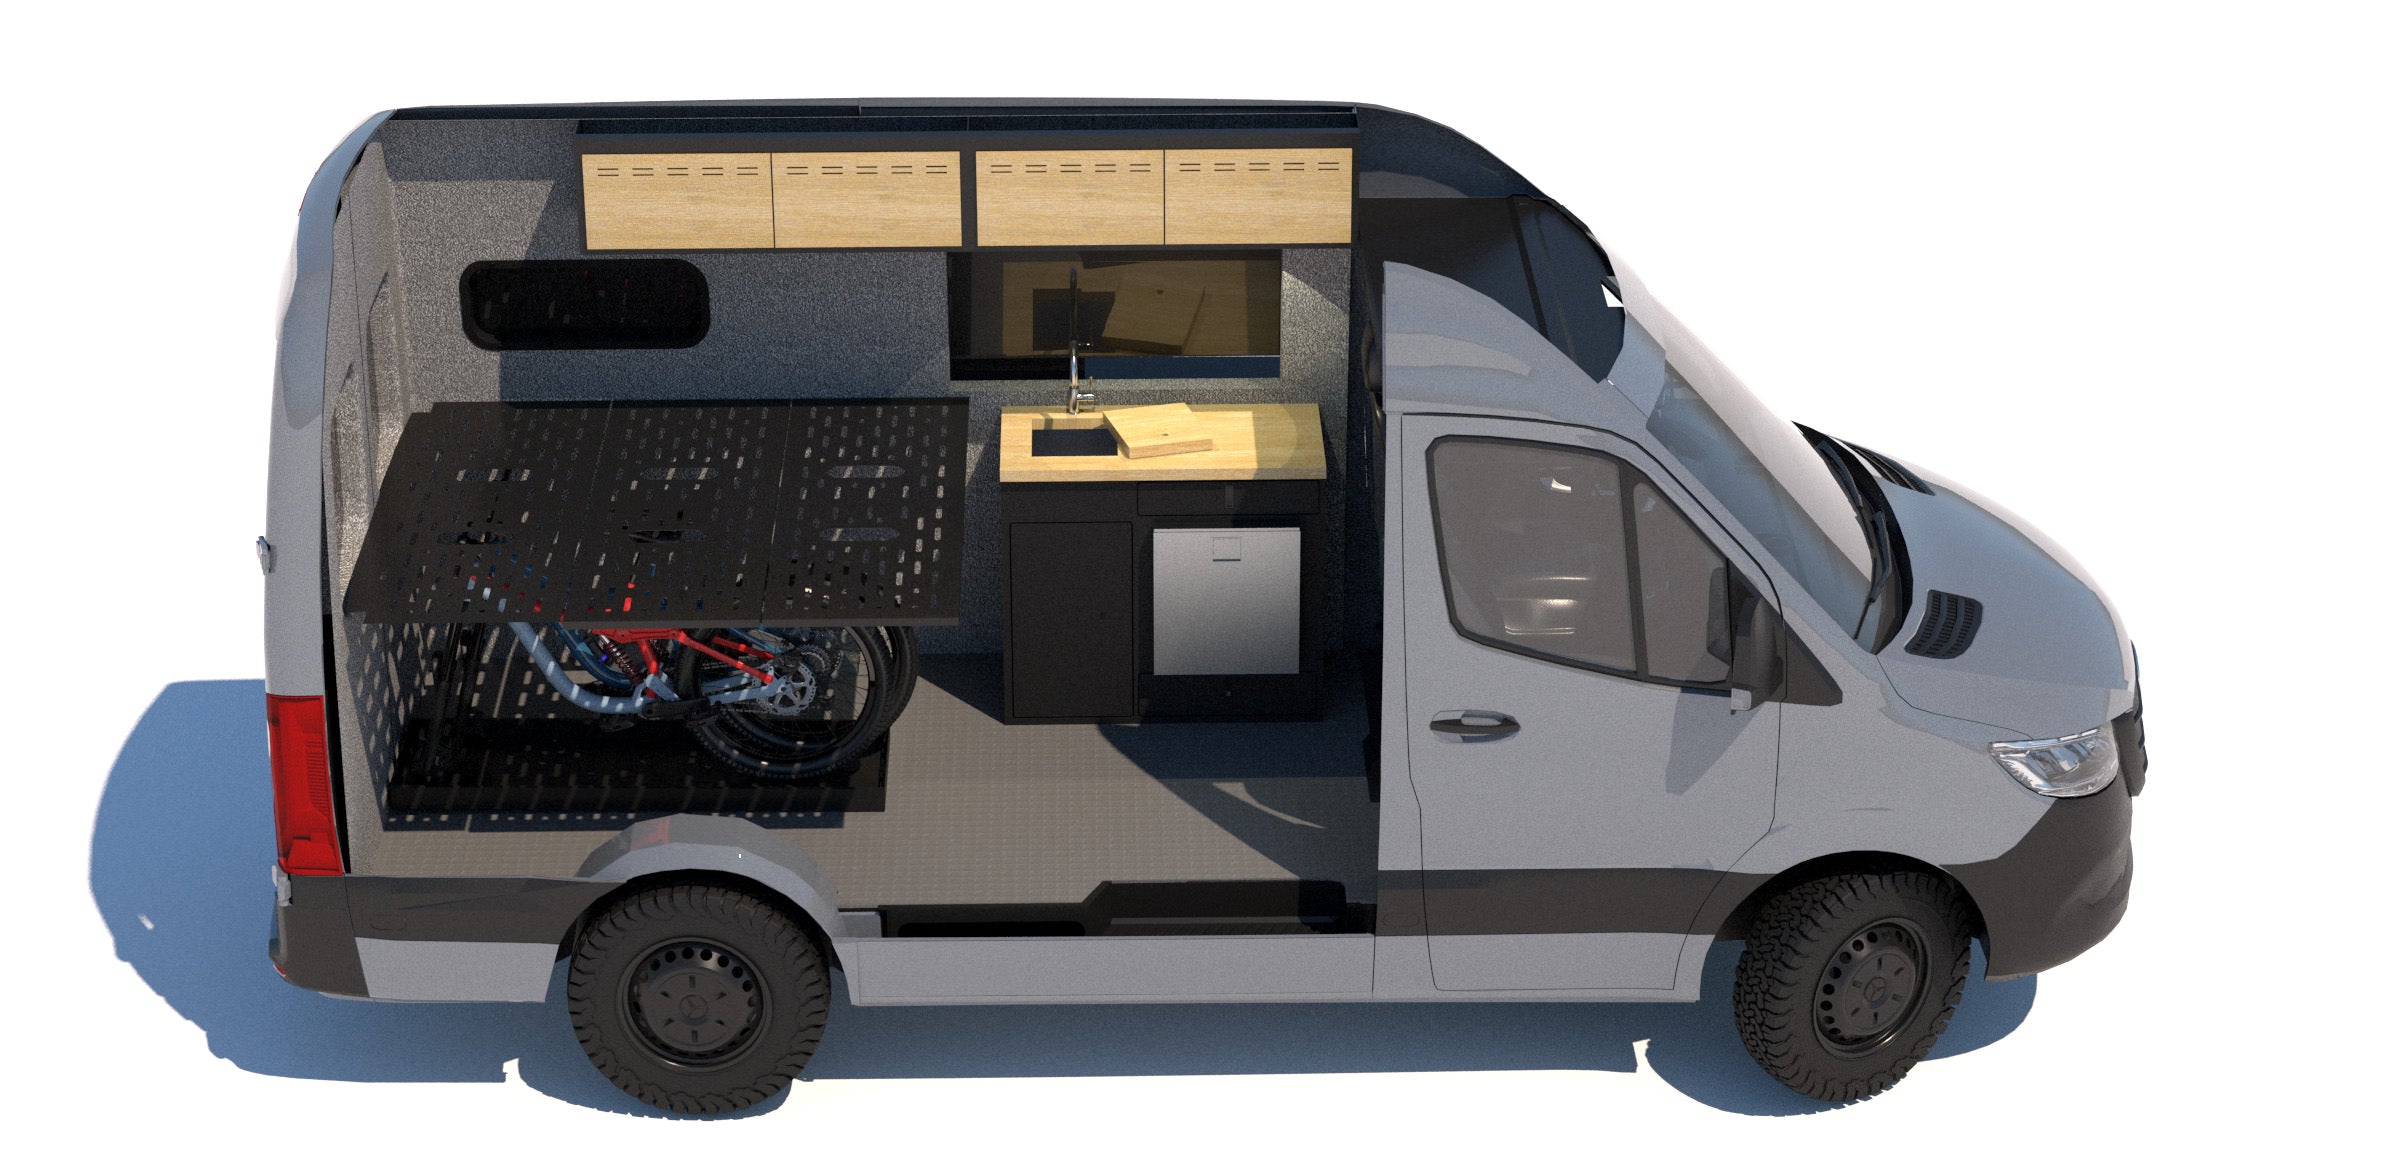 Conversion Layouts For The Sprinter 144 Van